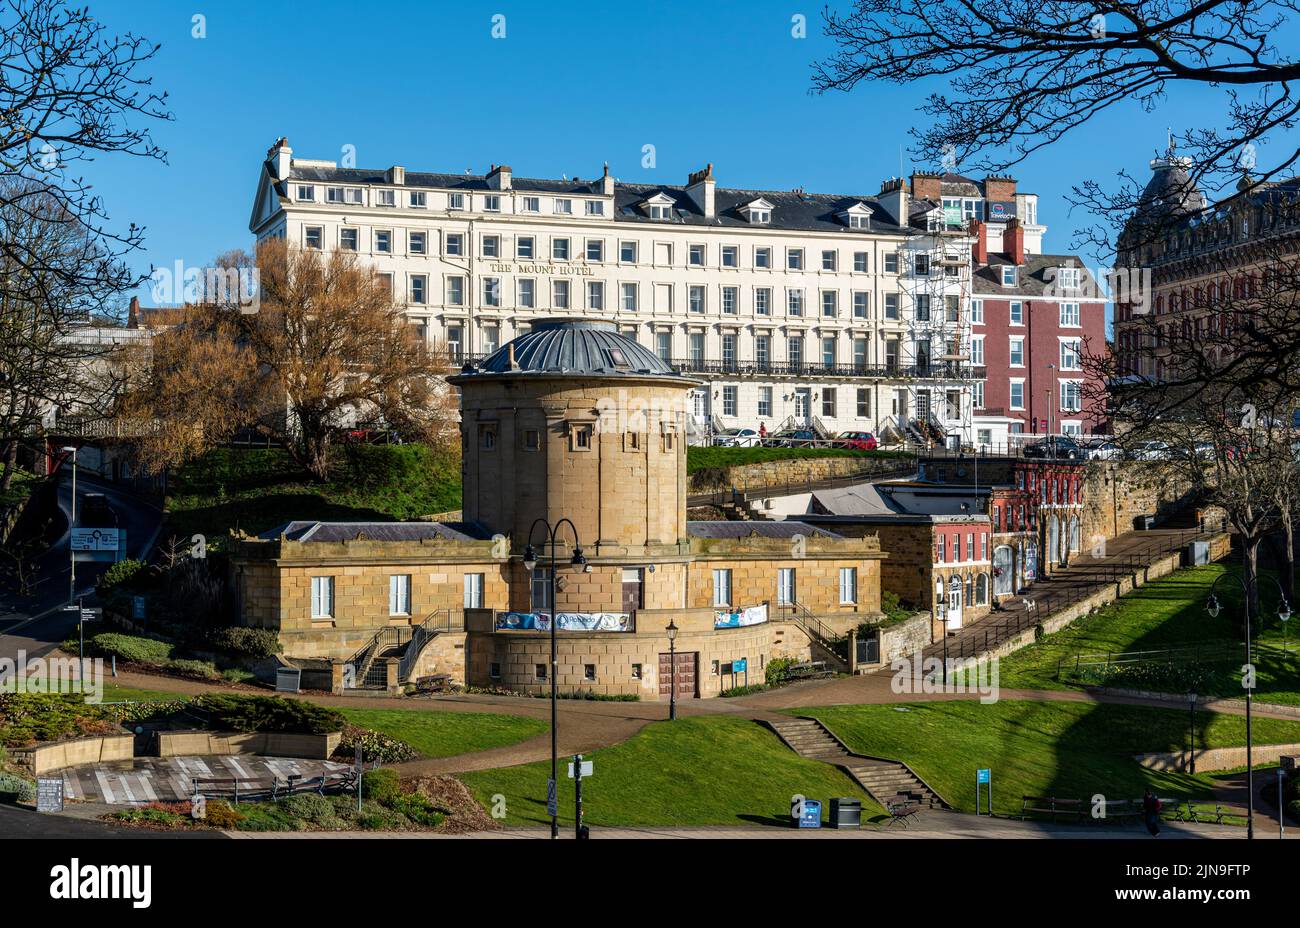 The Rotunda Museum on Scarbrough's Valley Road Stock Photo